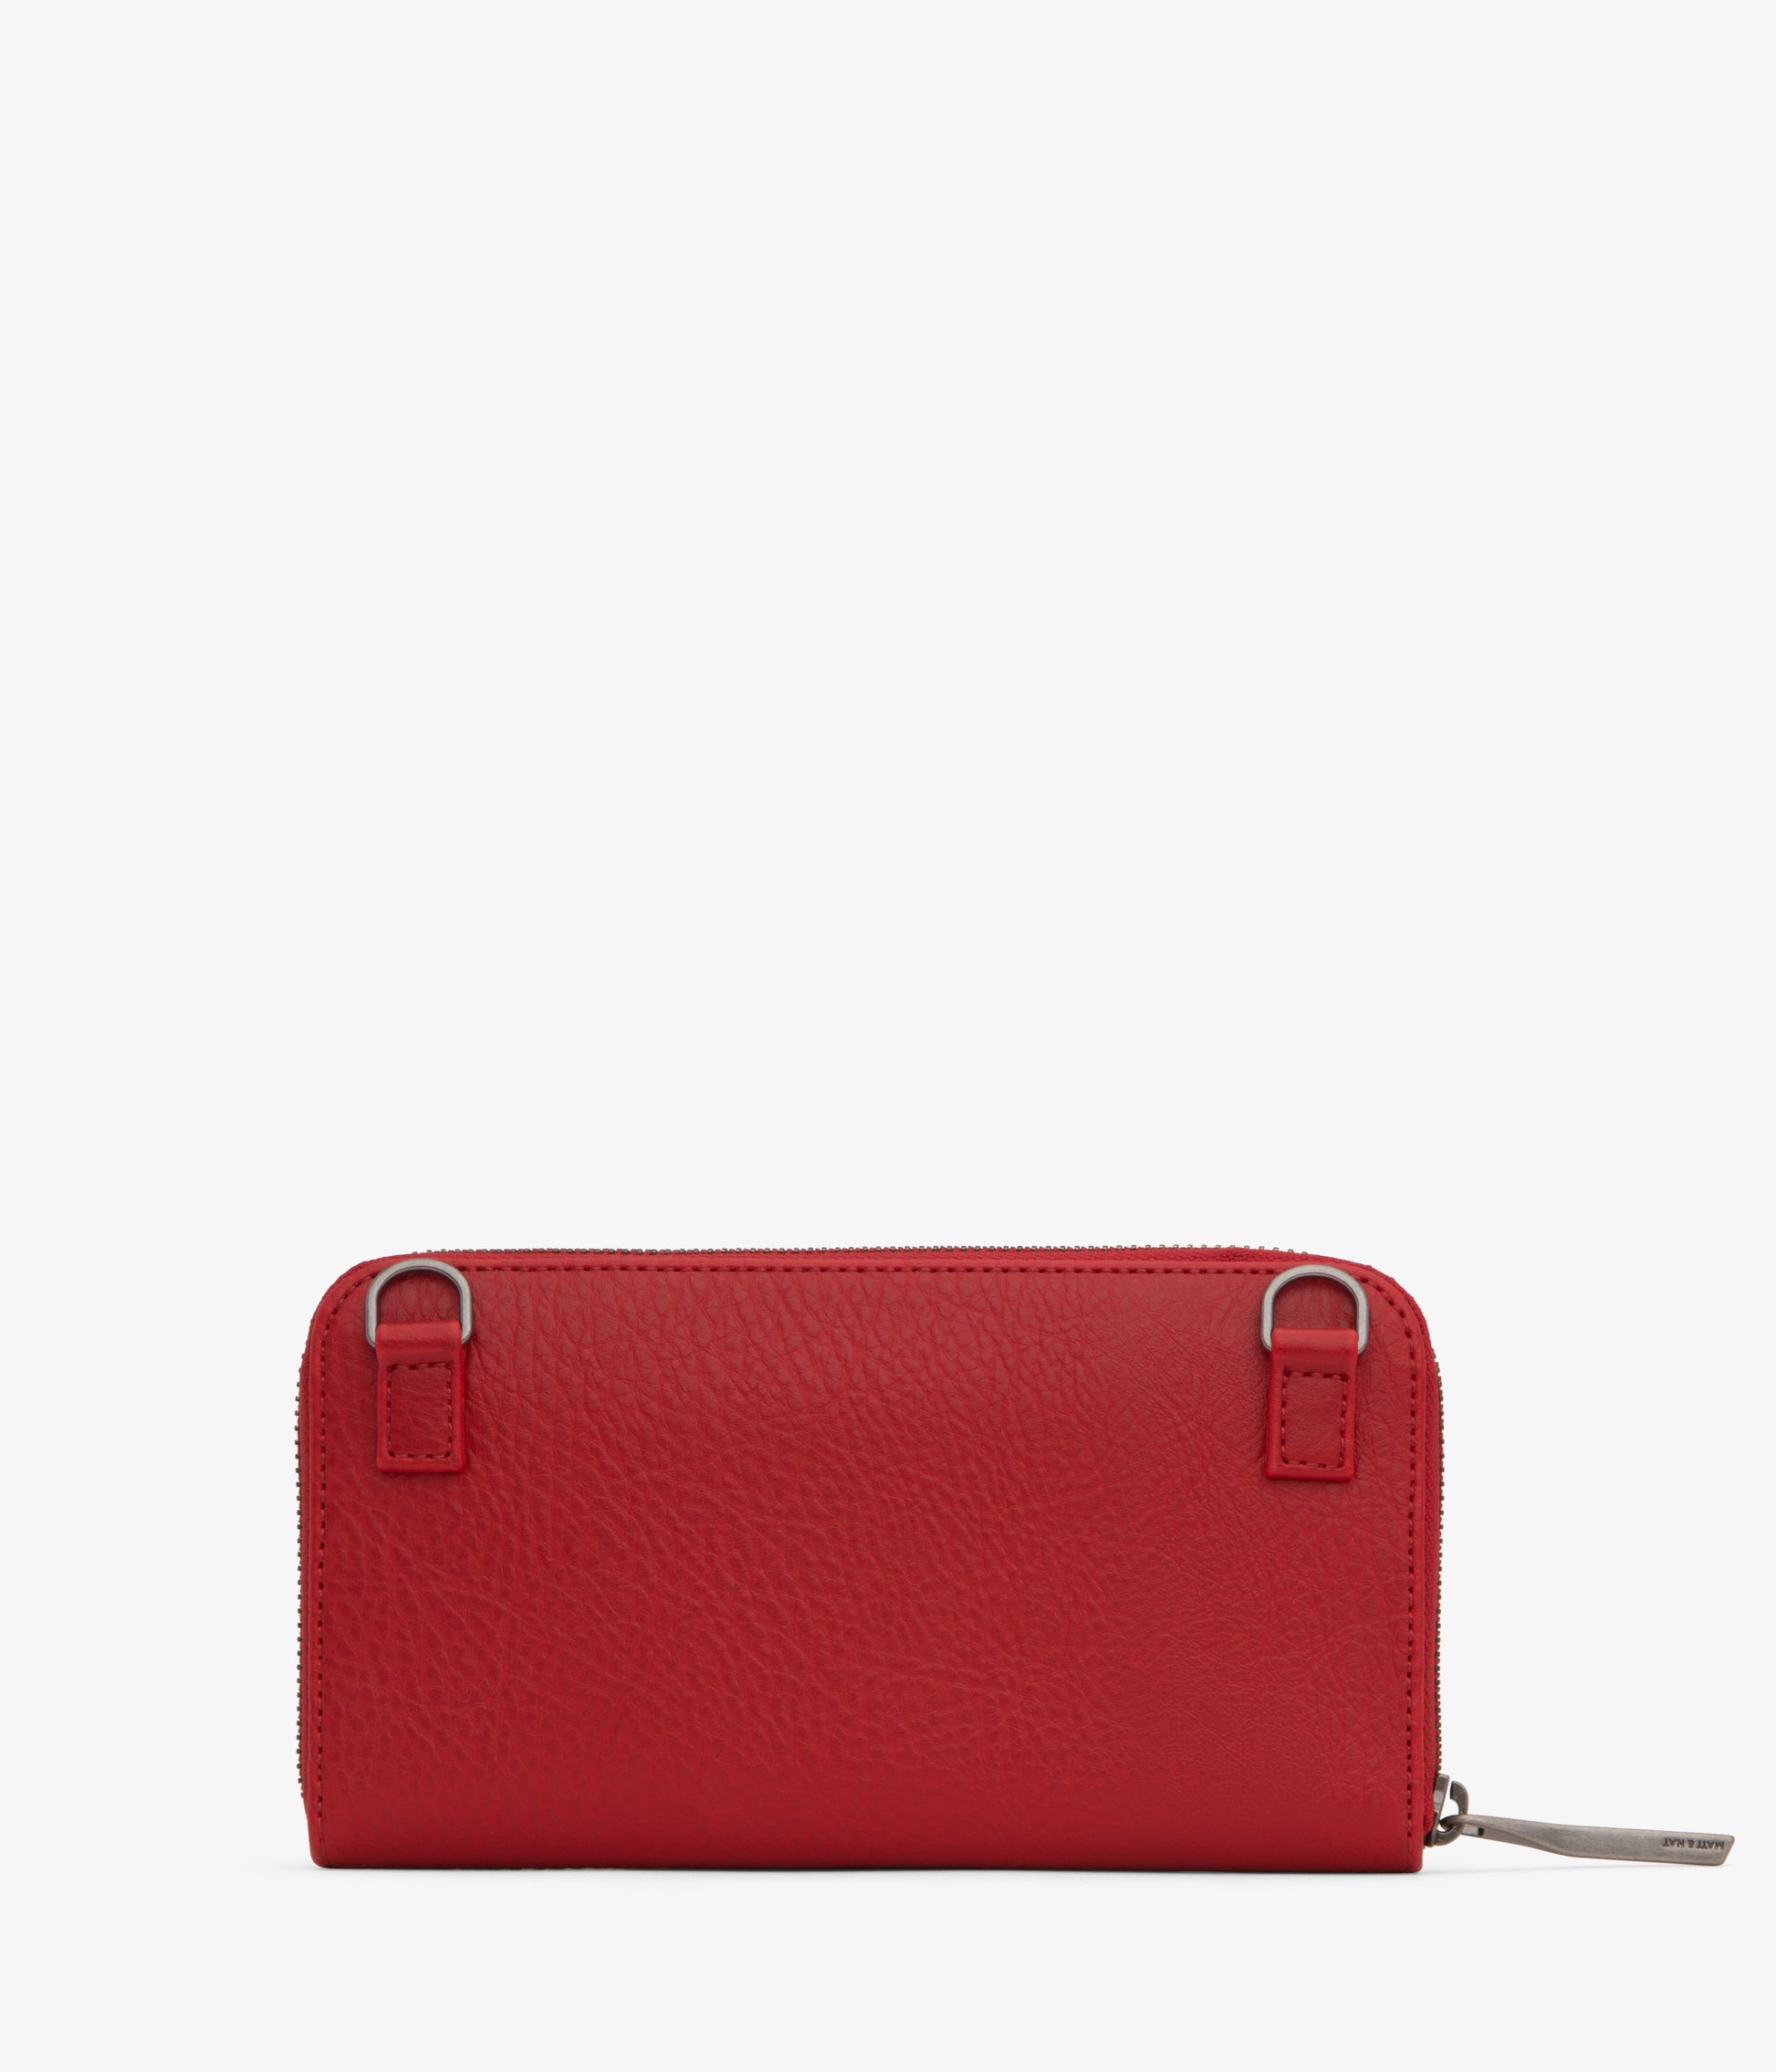 INVER Vegan Crossbody Wallet - Dwell | Color: Red - variant::red